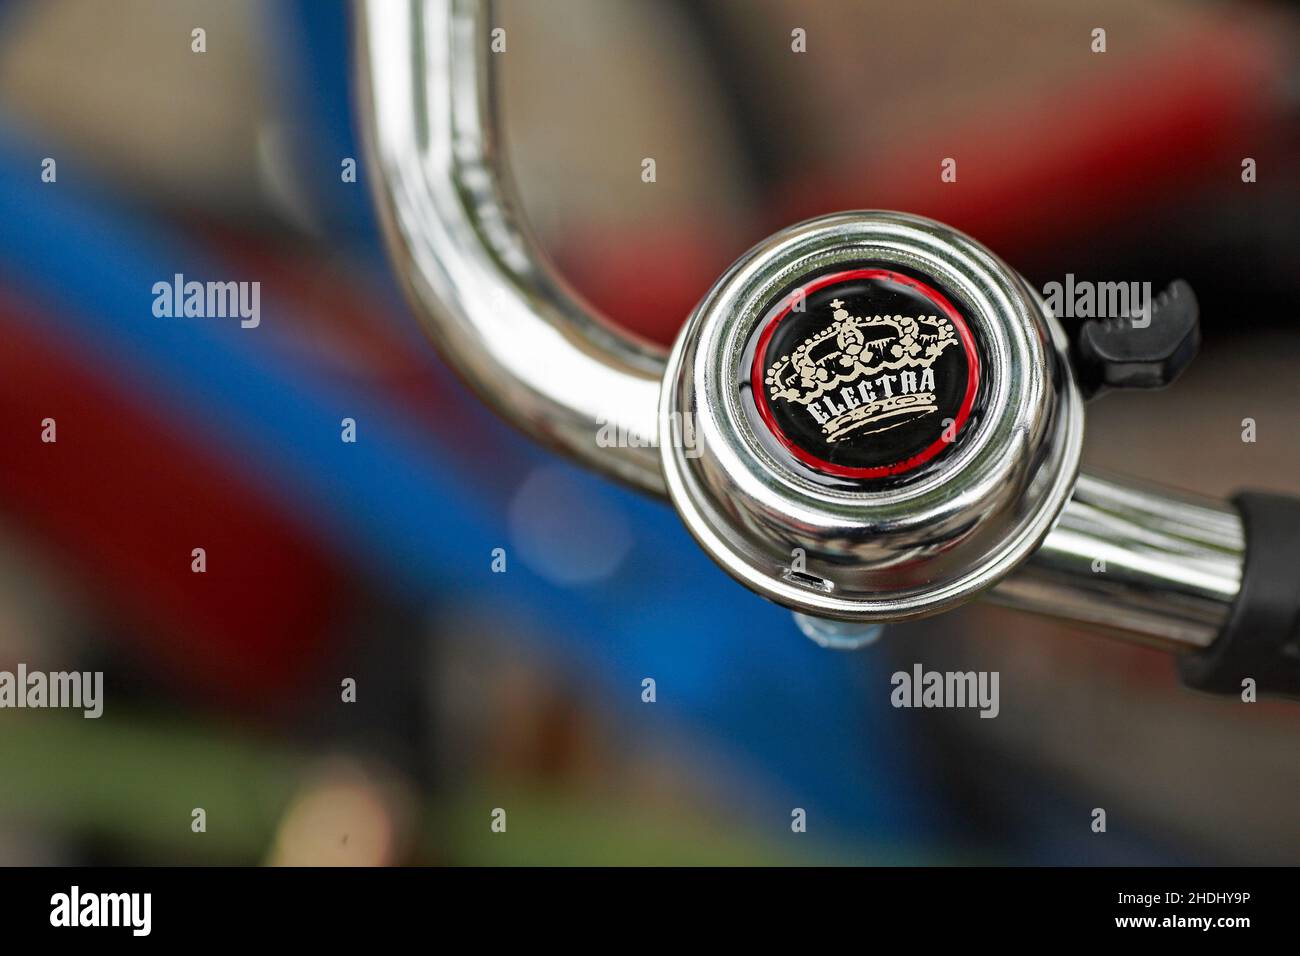 Crown bicycle bell .Retro style bicycle hand-grip with ancient ring bell with blurred  background. Stock Photo